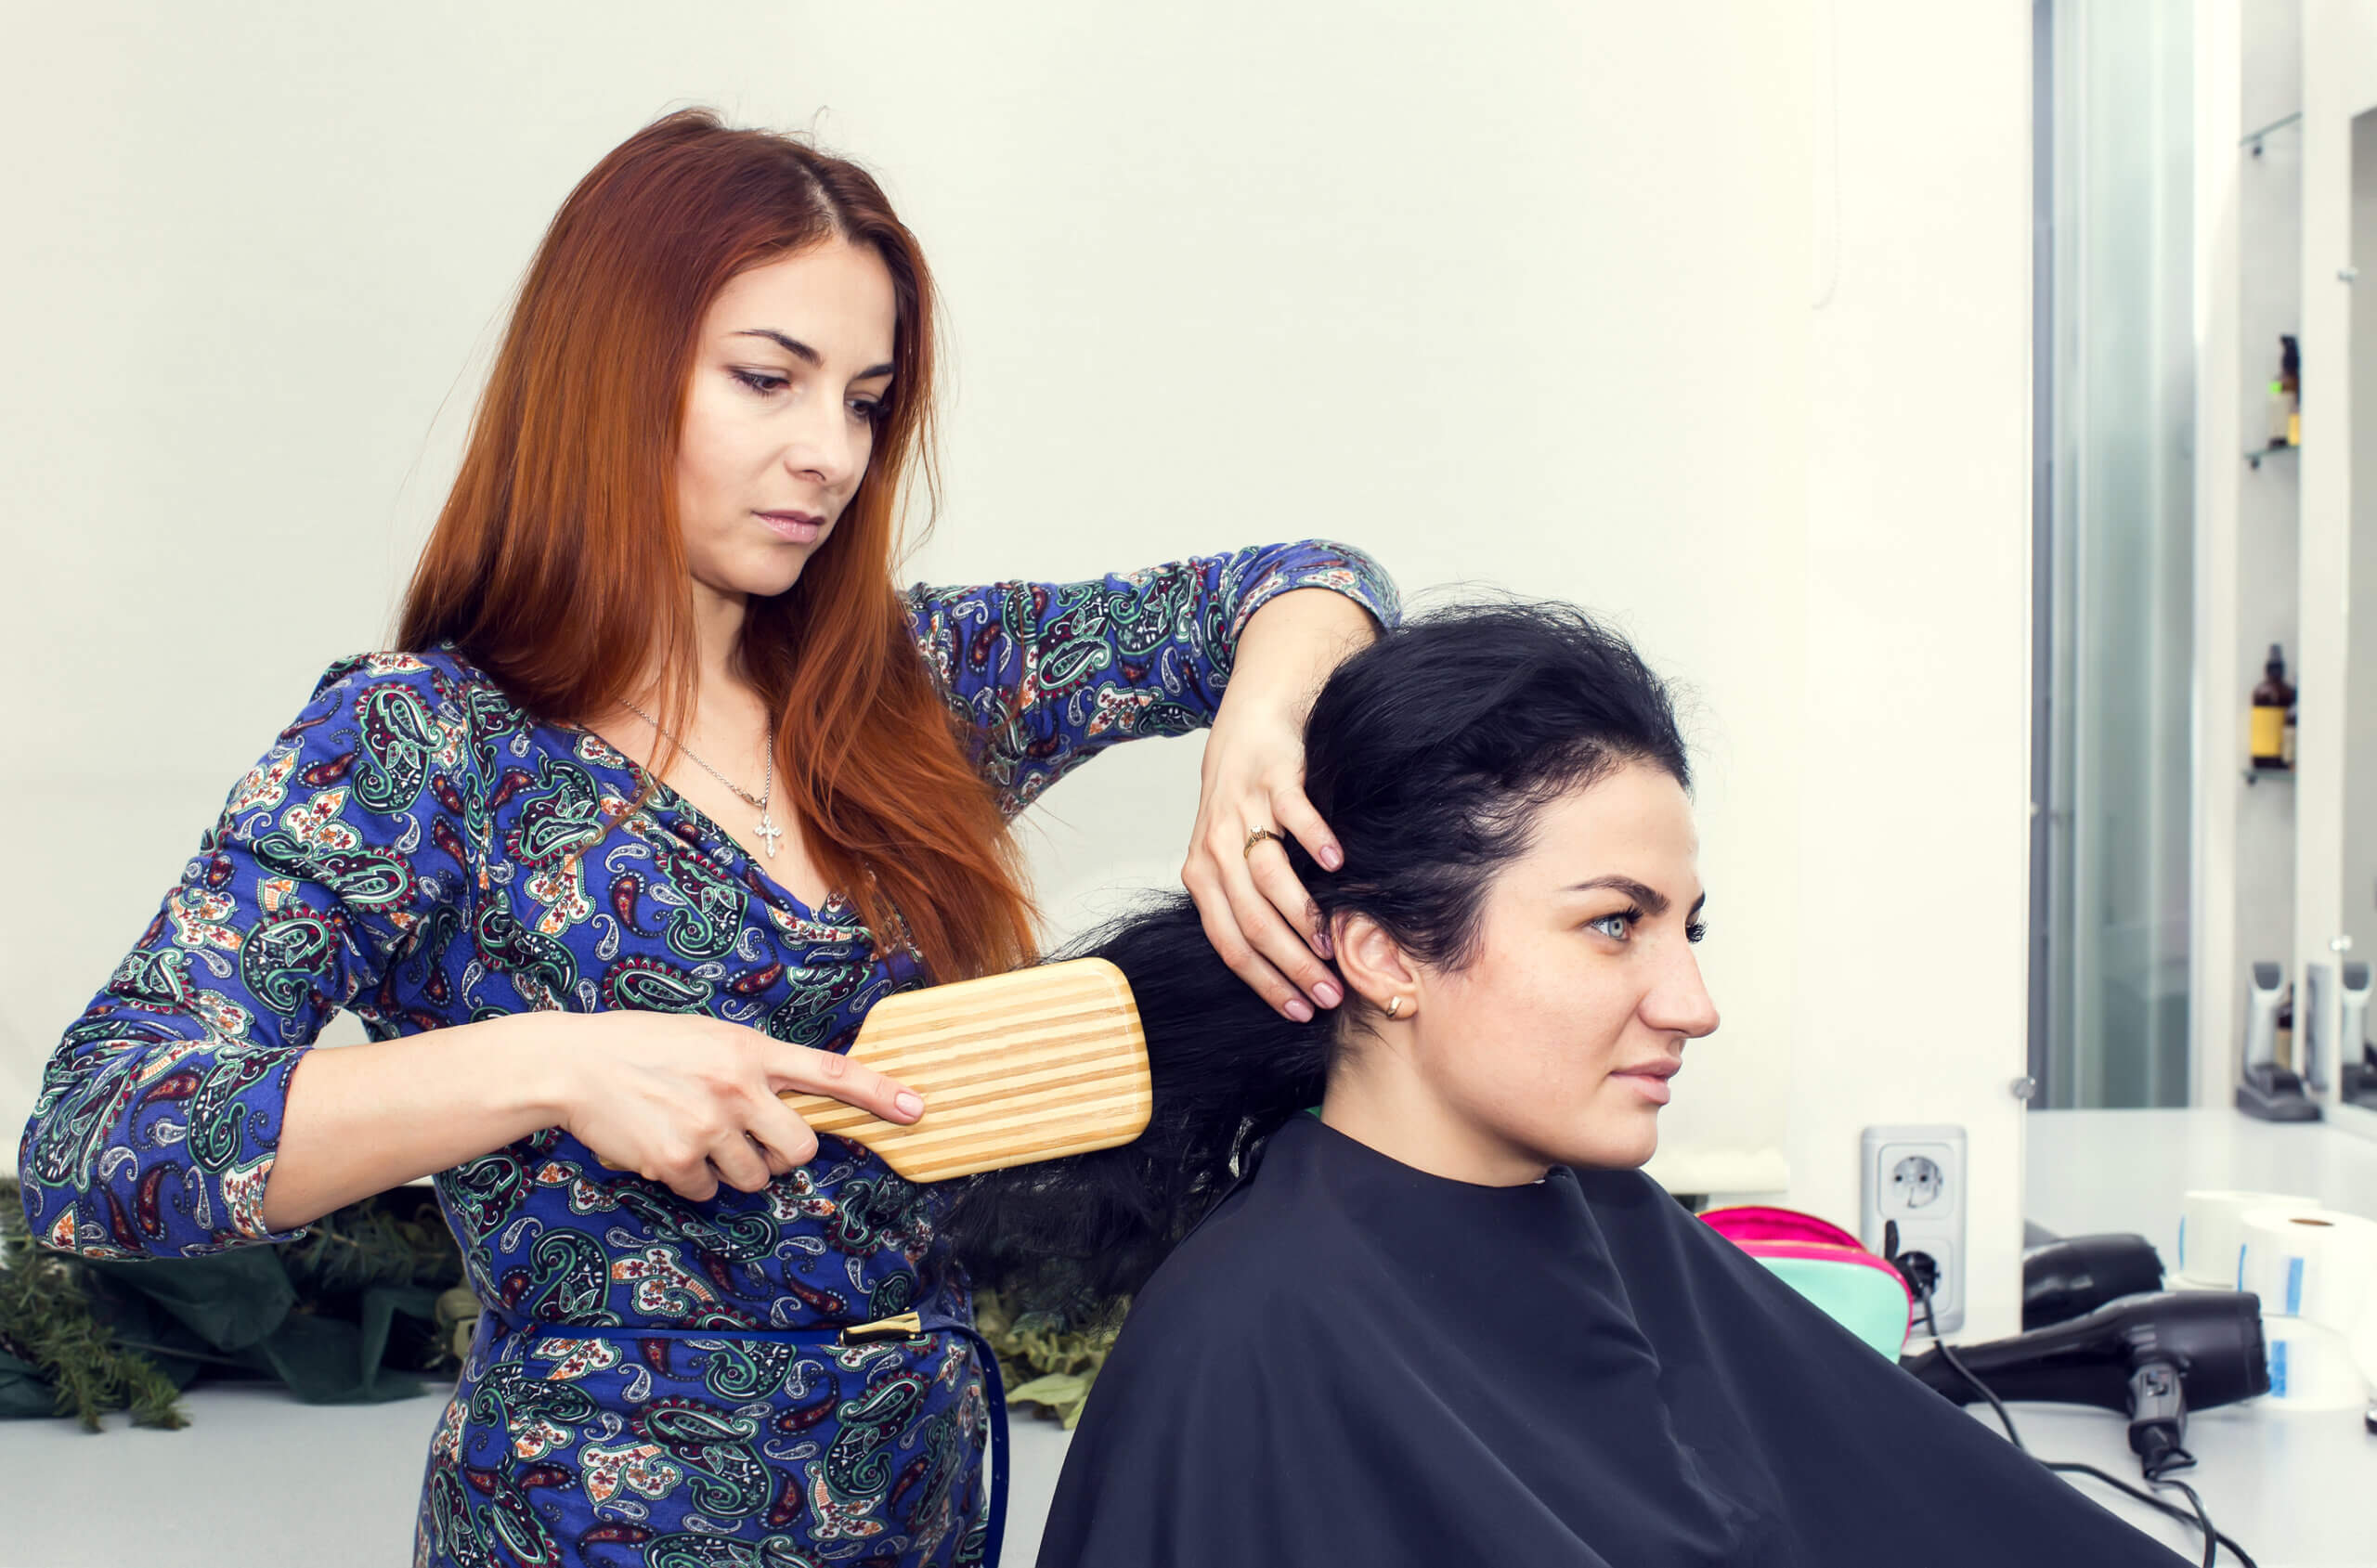 hairstylist brushing client's hair